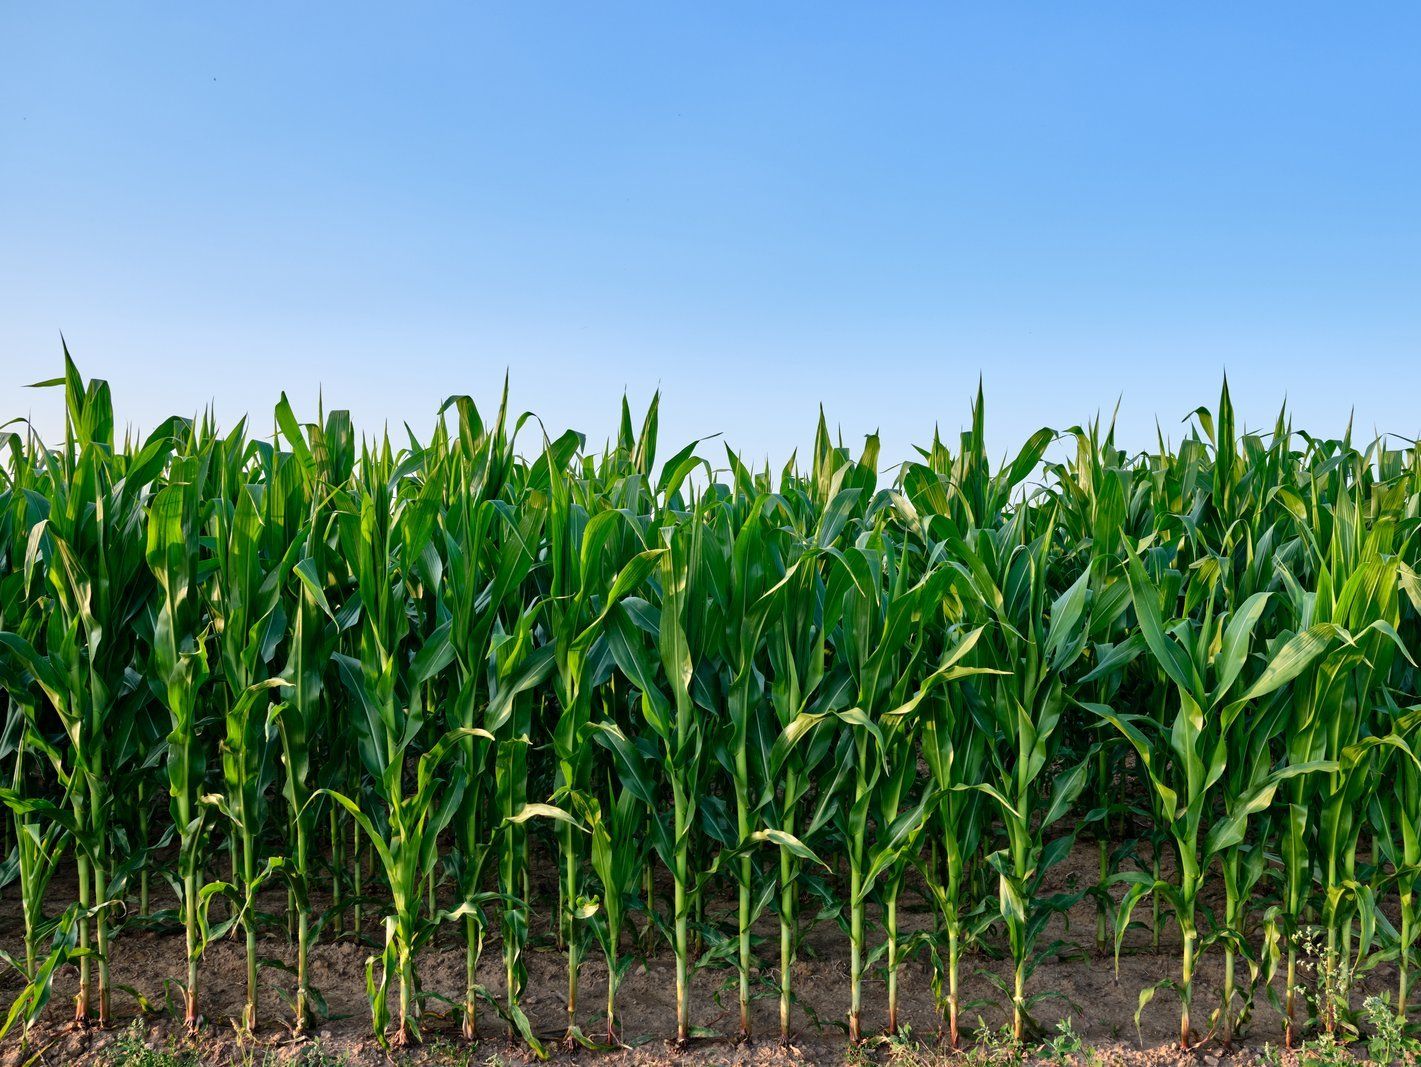 Image of rows of green corn standing in field.